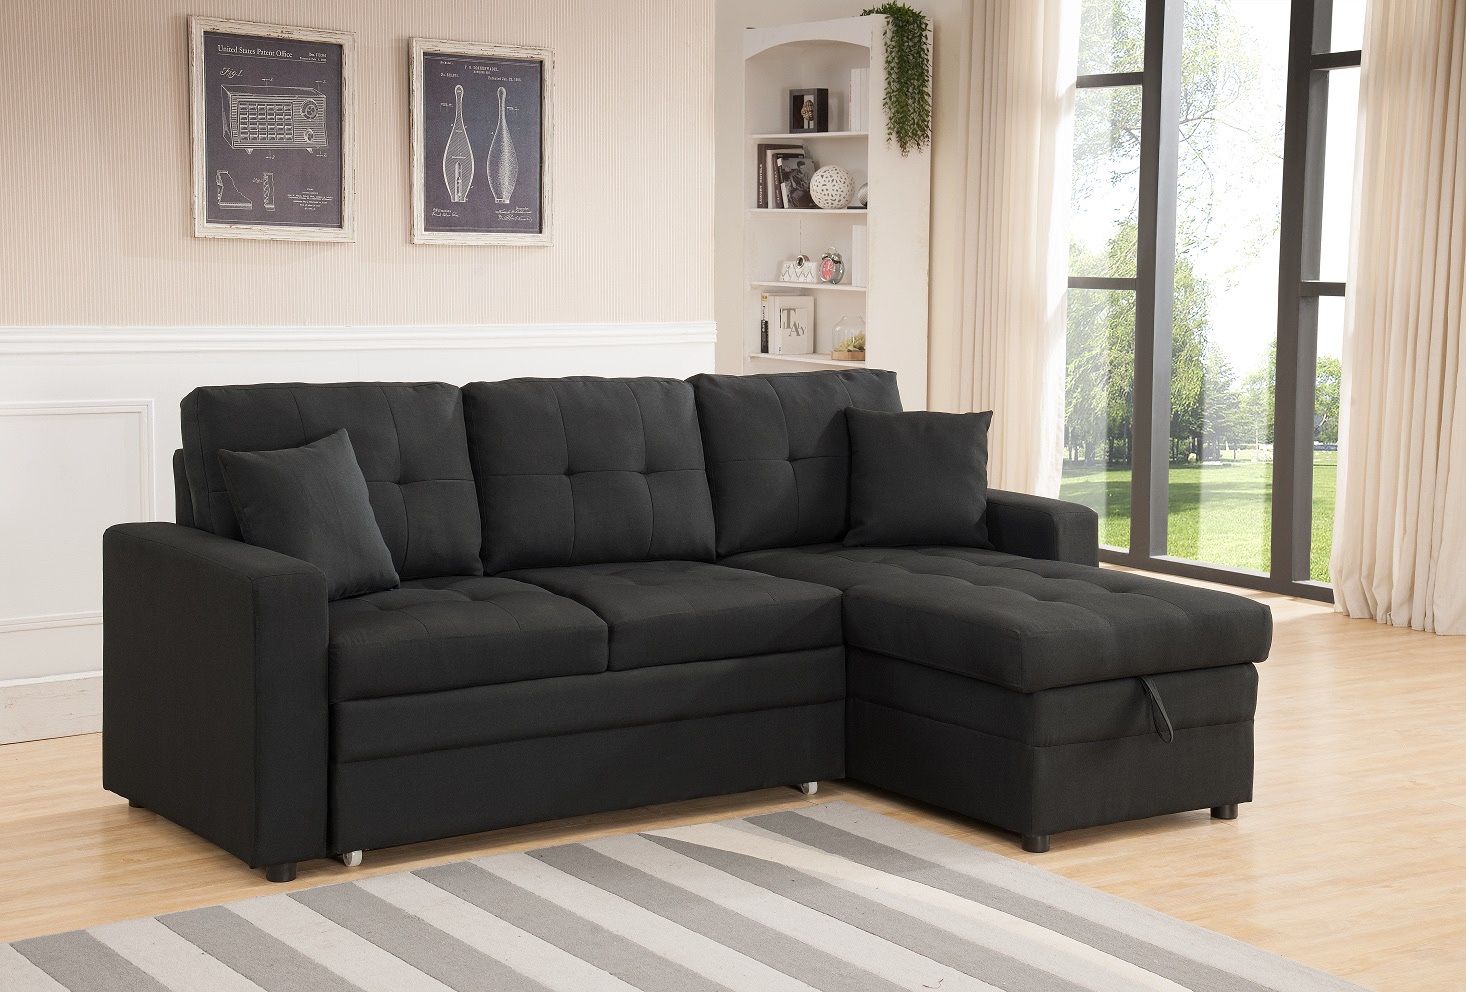 Brand New BLACK Linen Fabric Pull Out Sectional Sofa Bed W/ Storage & Pillows